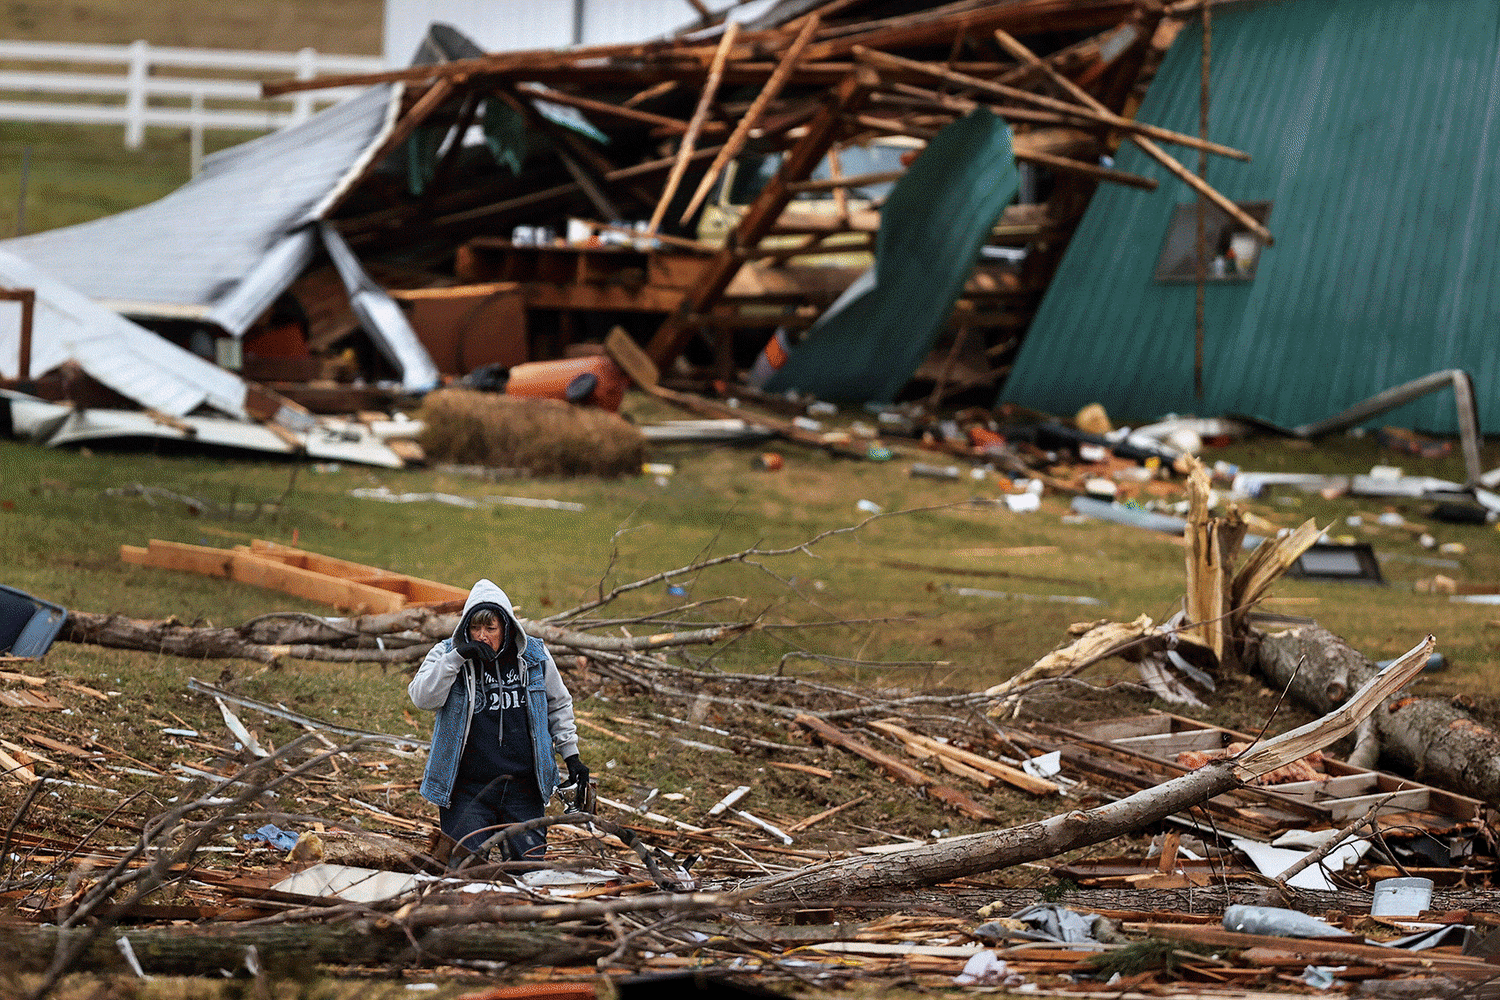 At least 70 feared dead in Kentucky as tornadoes rip through swaths of U.S.